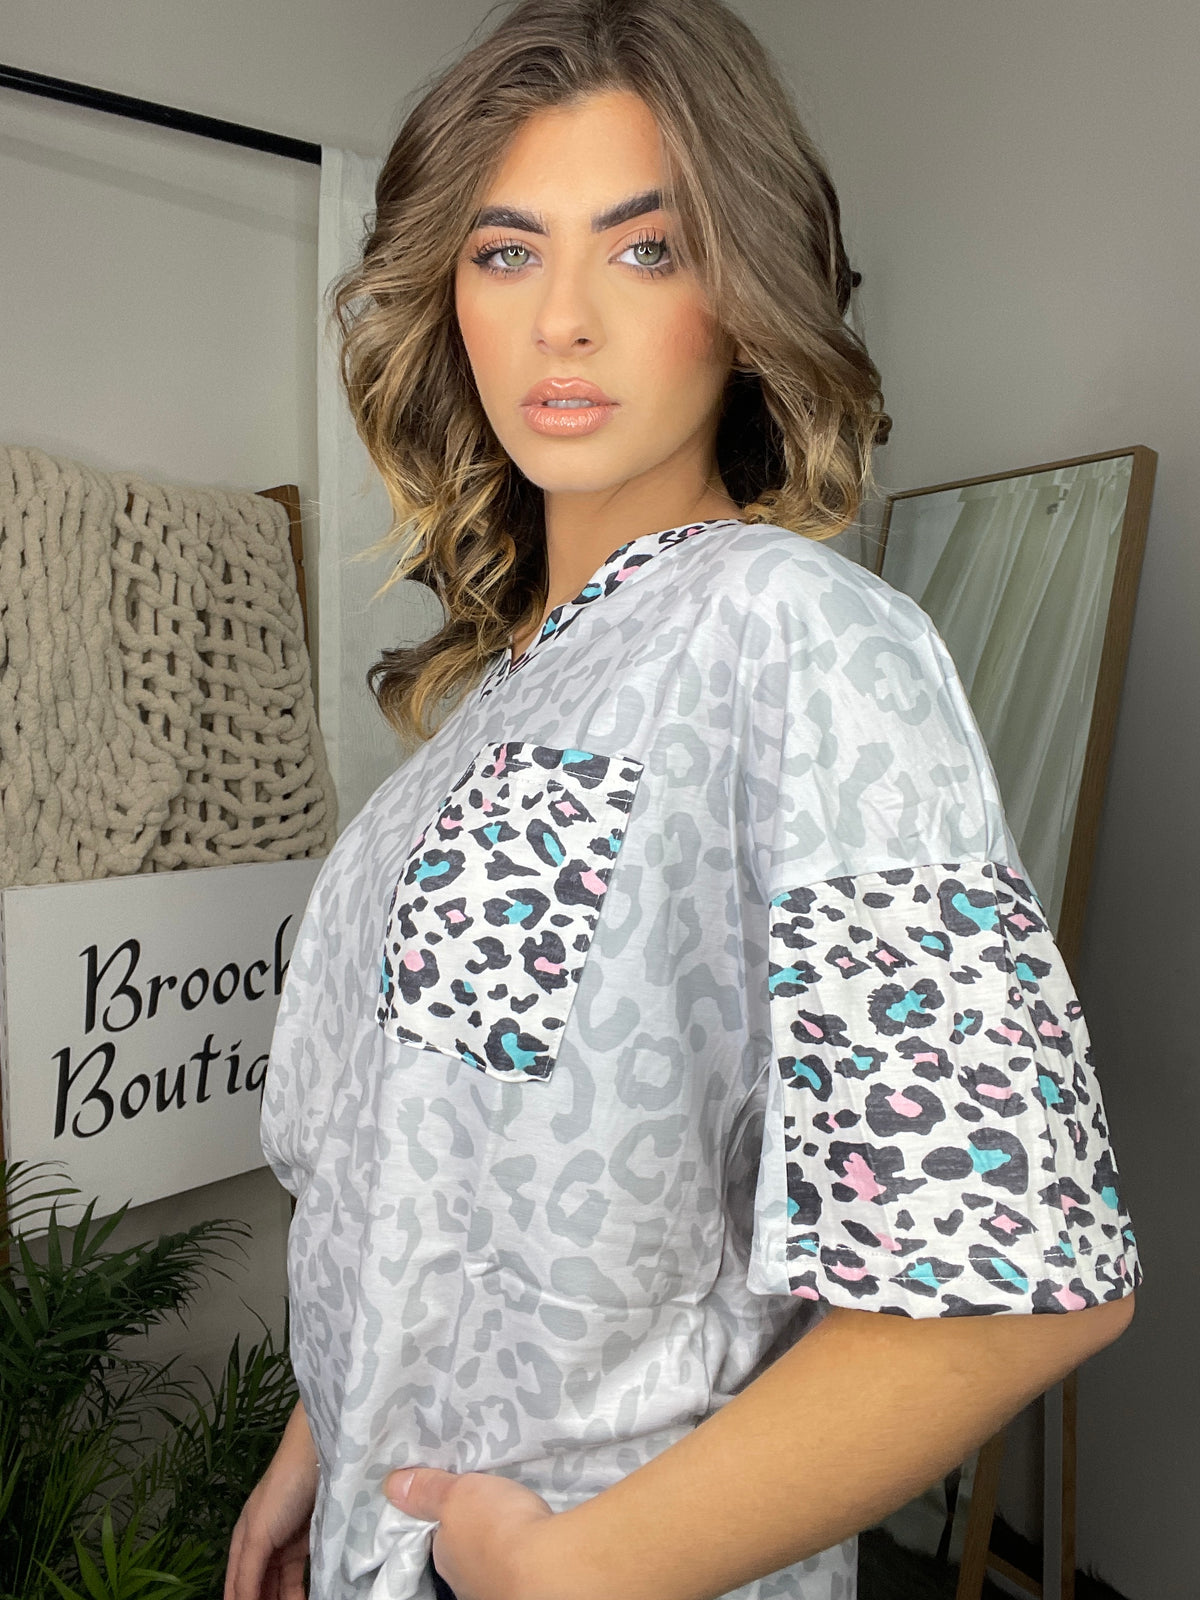 GREY LEOPARD TOP W/ COLORFUL LEOPARD ACCENTS